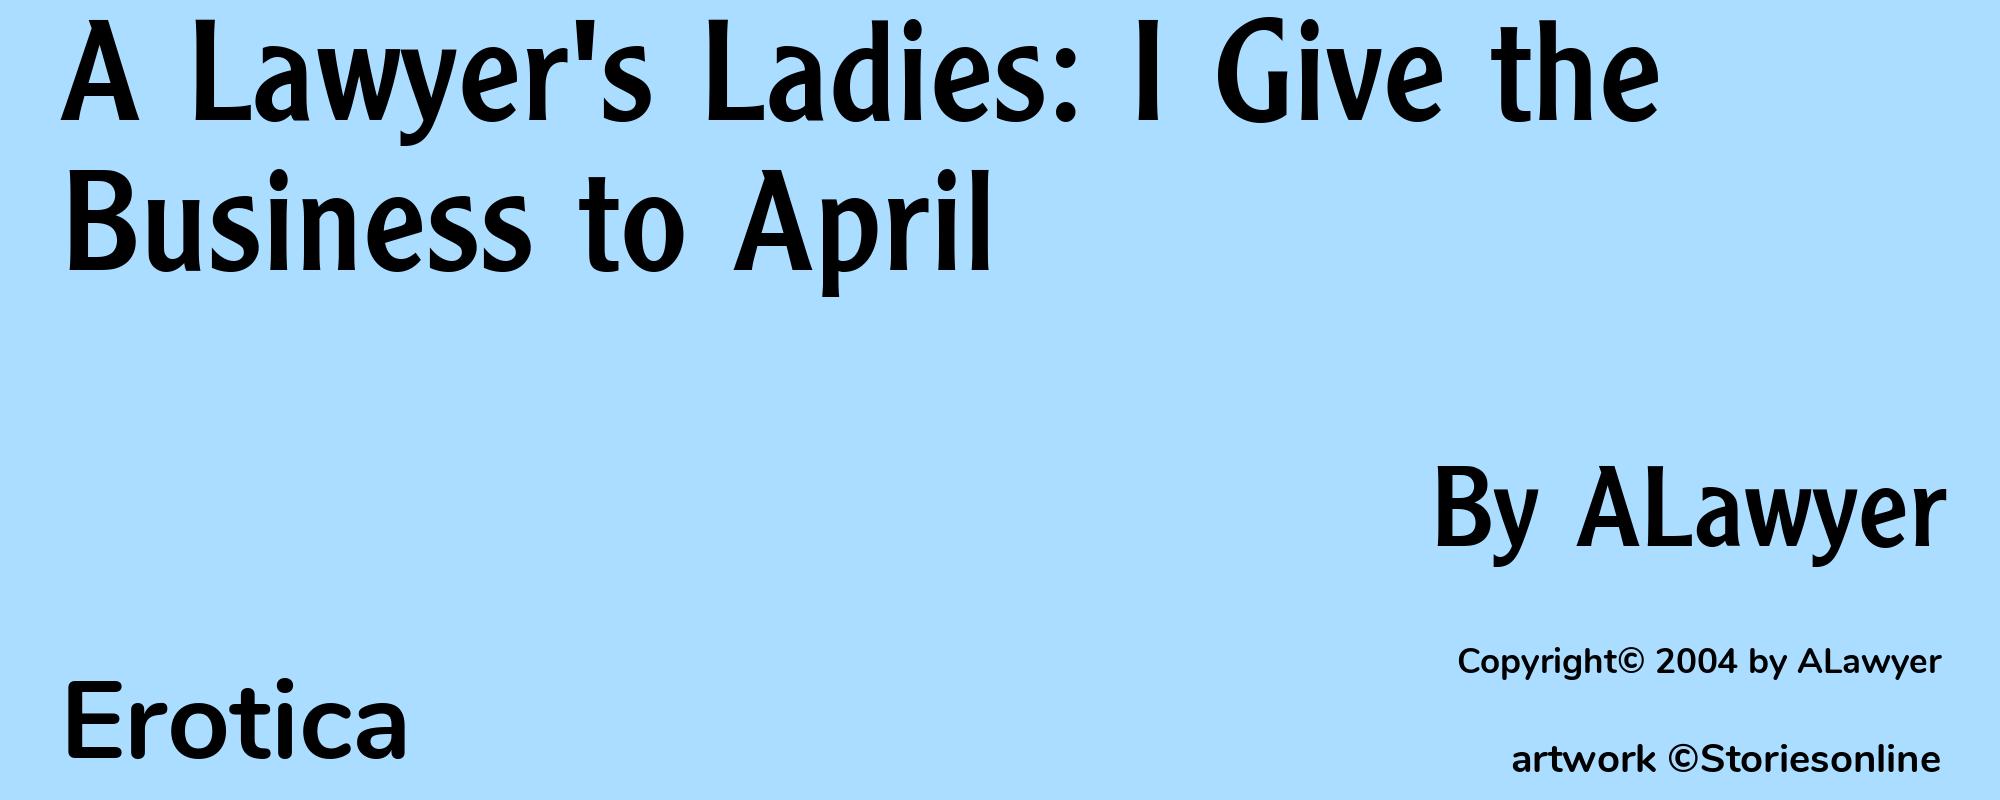 A Lawyer's Ladies: I Give the Business to April - Cover